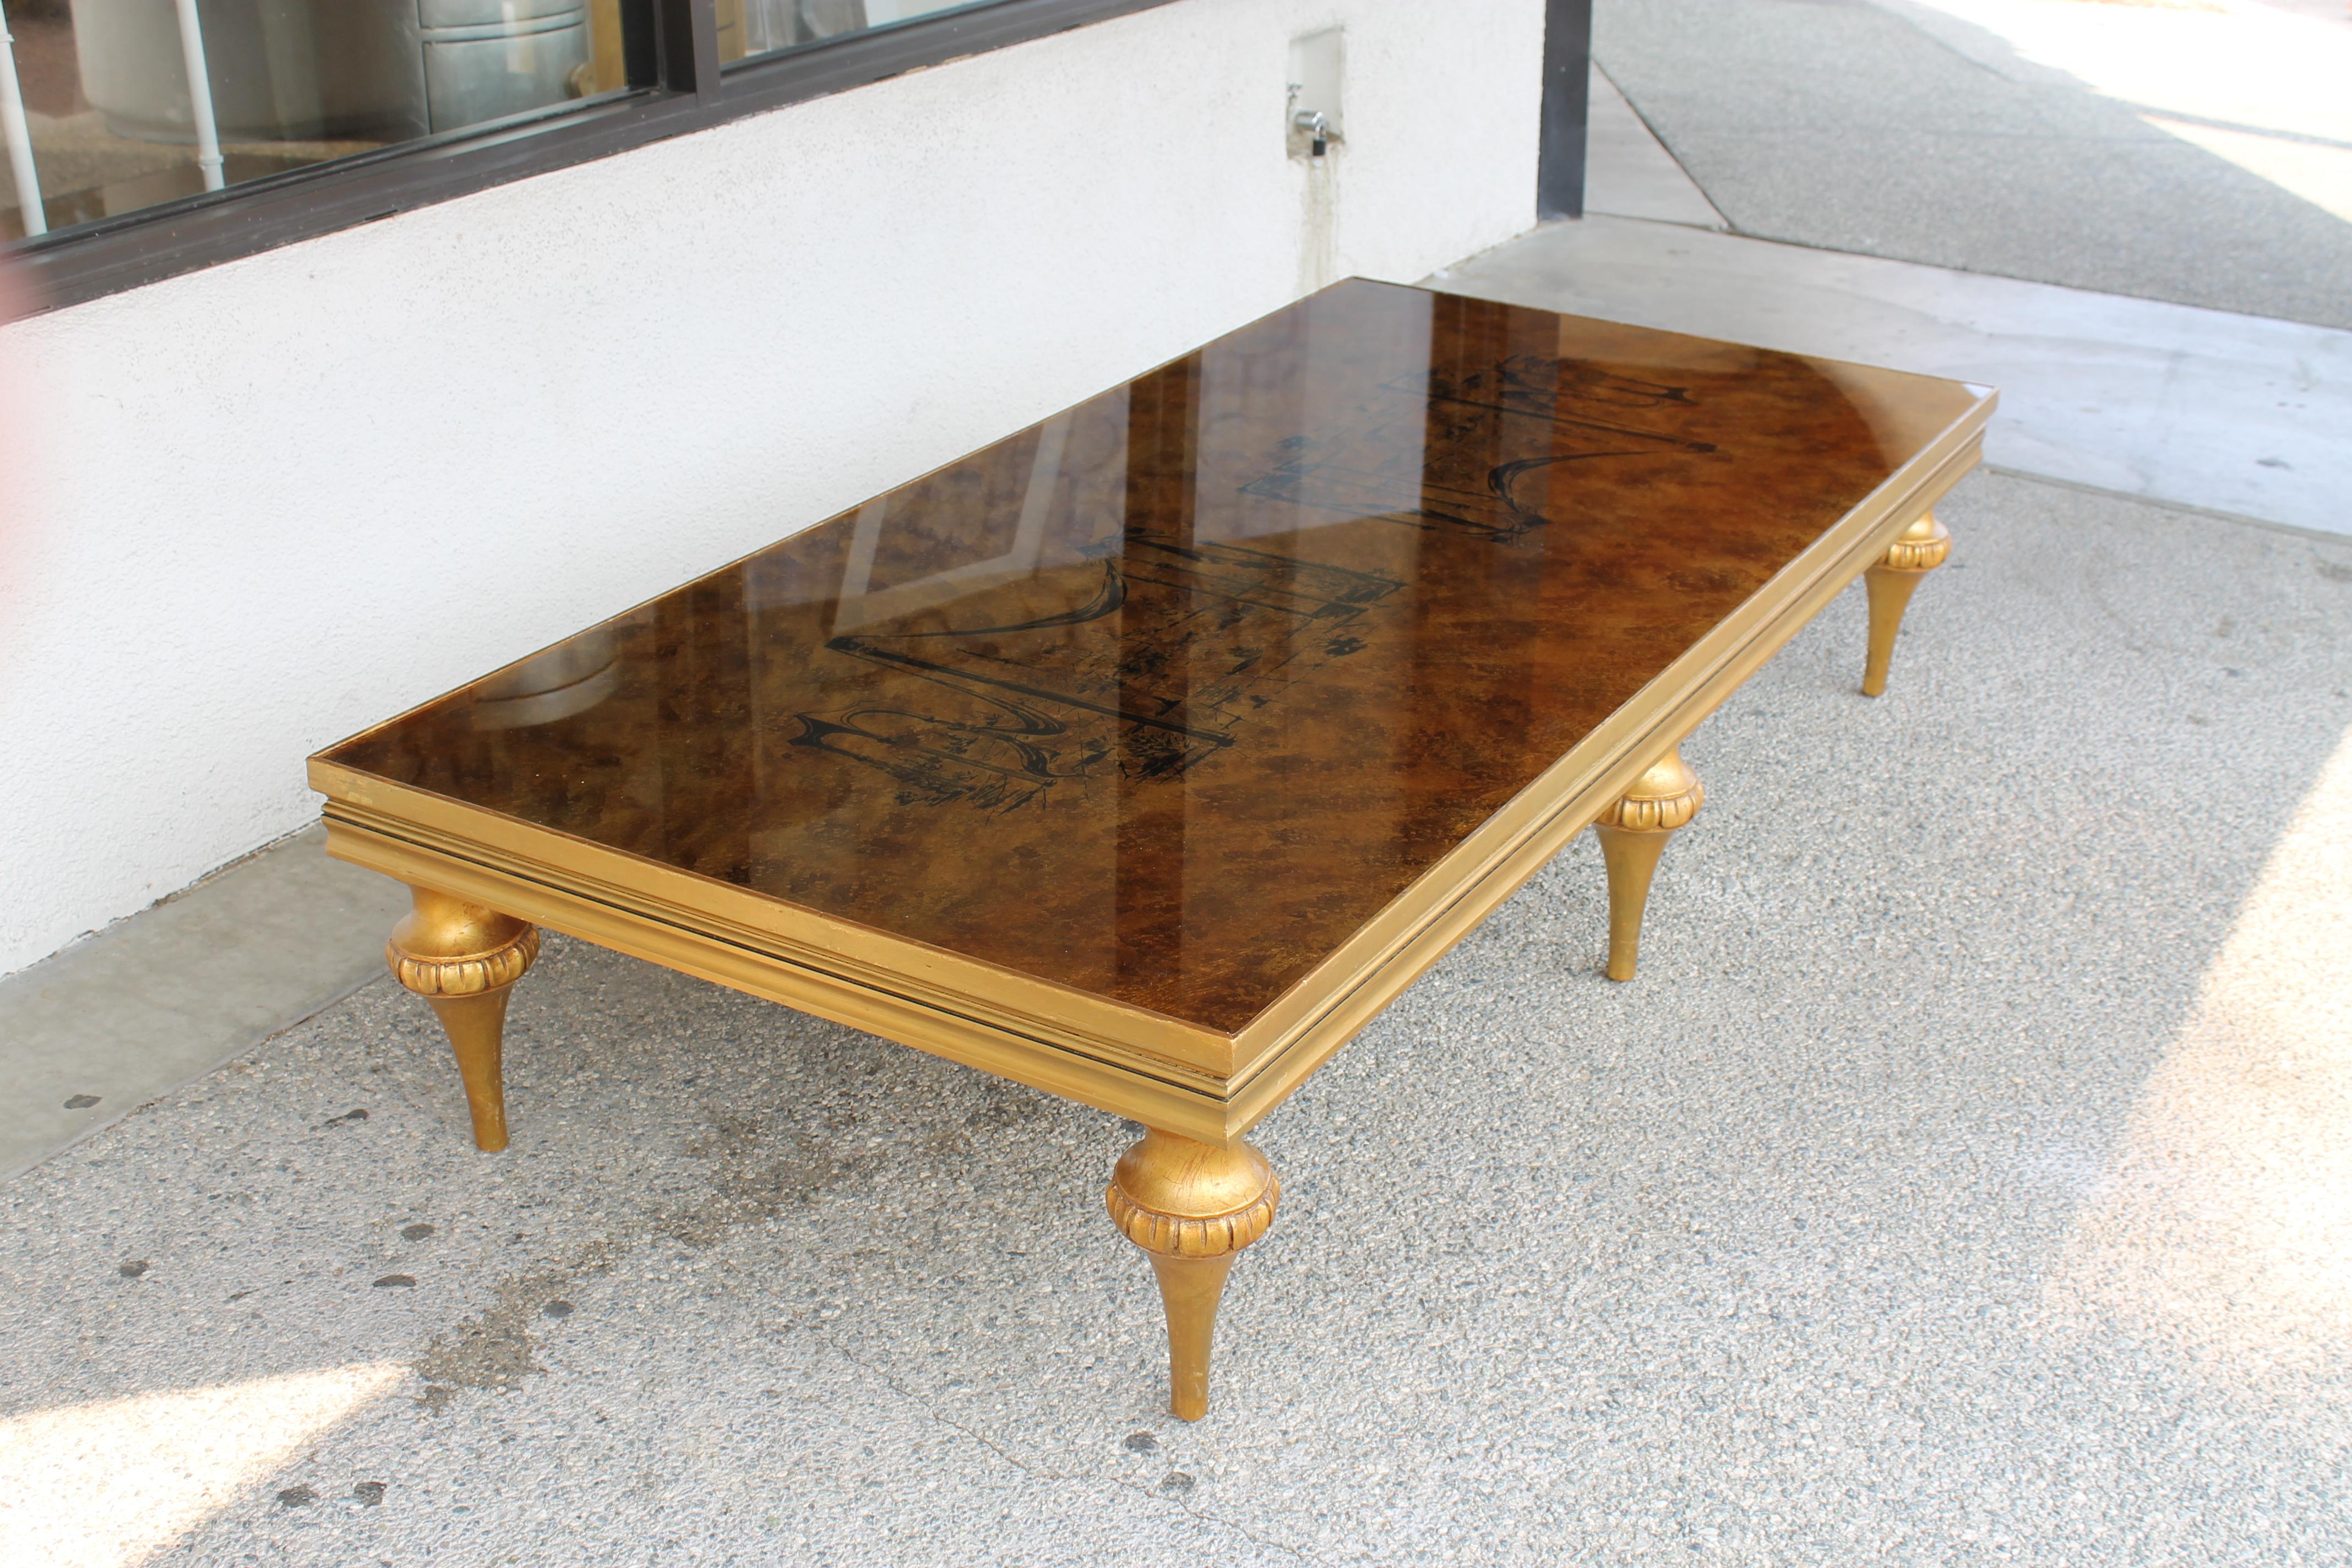 A huge (6 foot) Venetian style coffee table with reverse painted glass top surface, rich gold with black surrealist landscape. Carved gilt painted wooden legs. Table measures 72